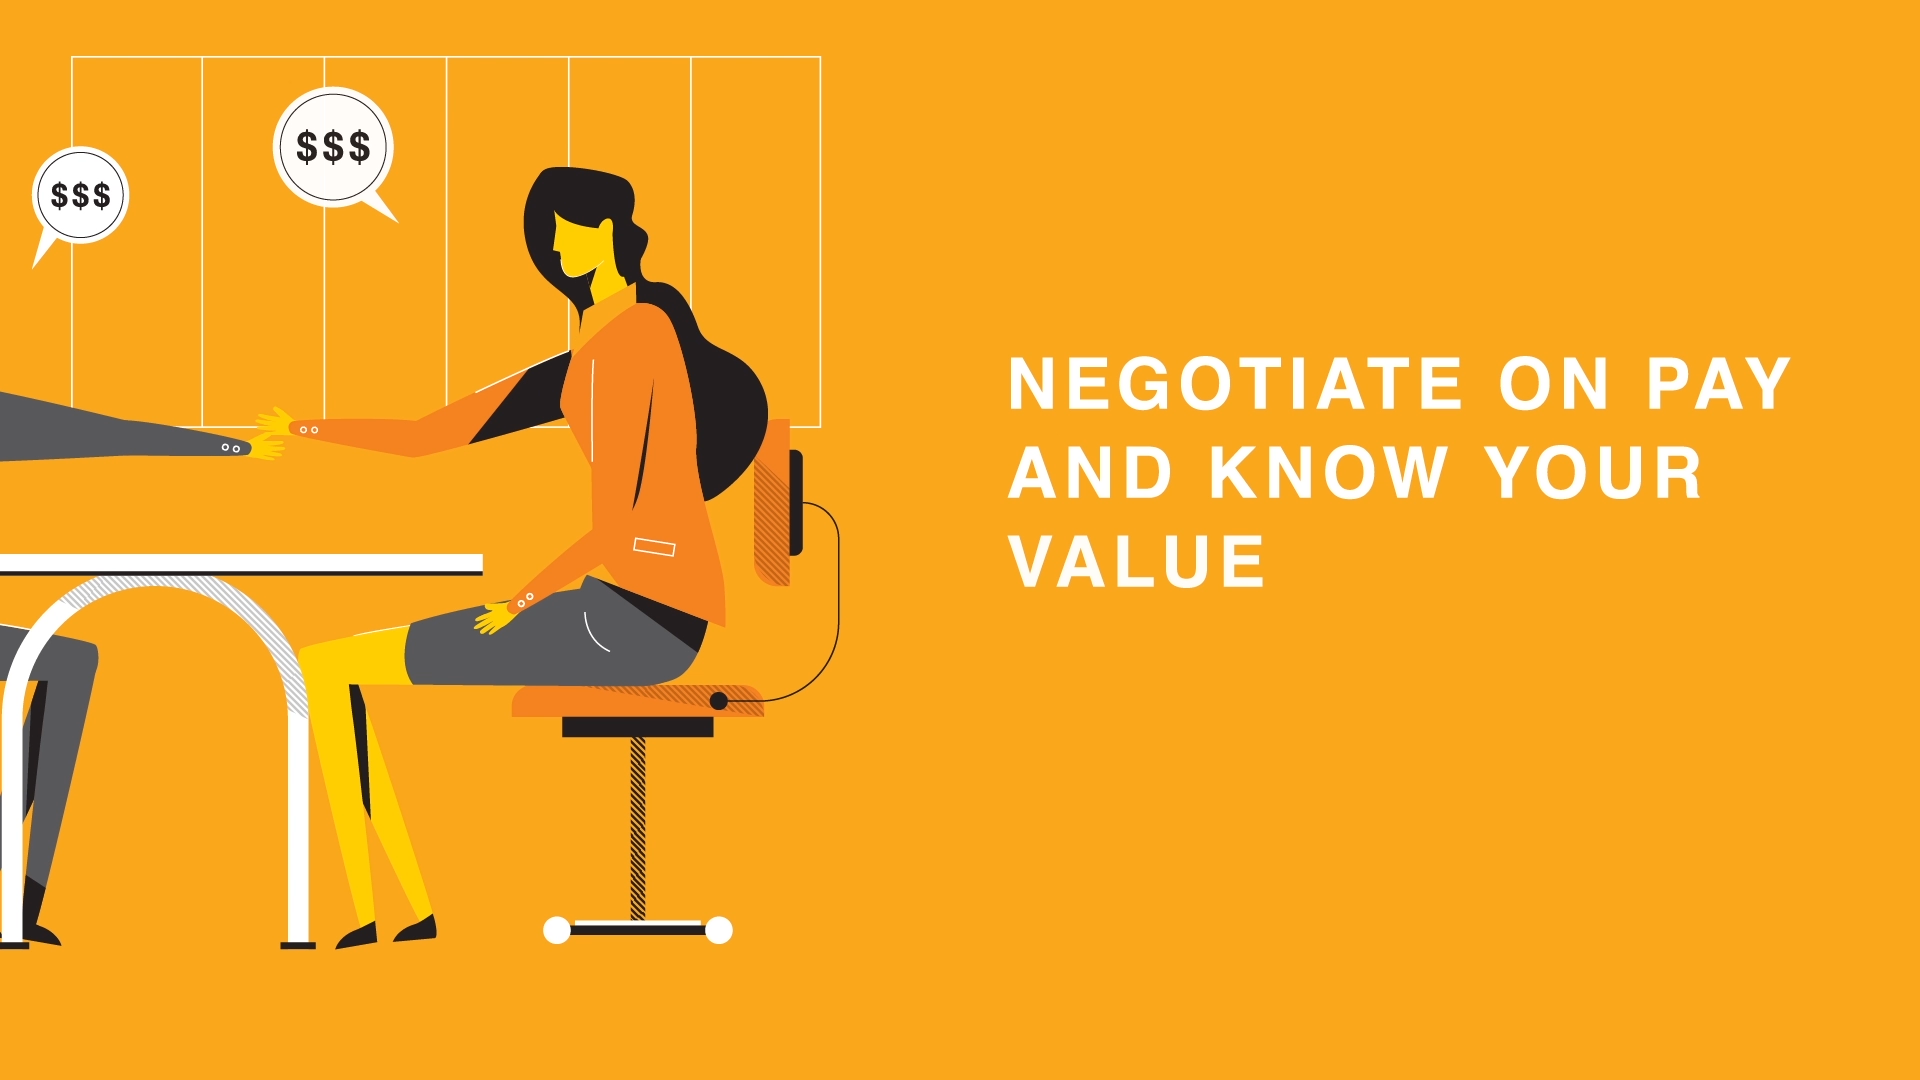 Negotiate on pay and know your value